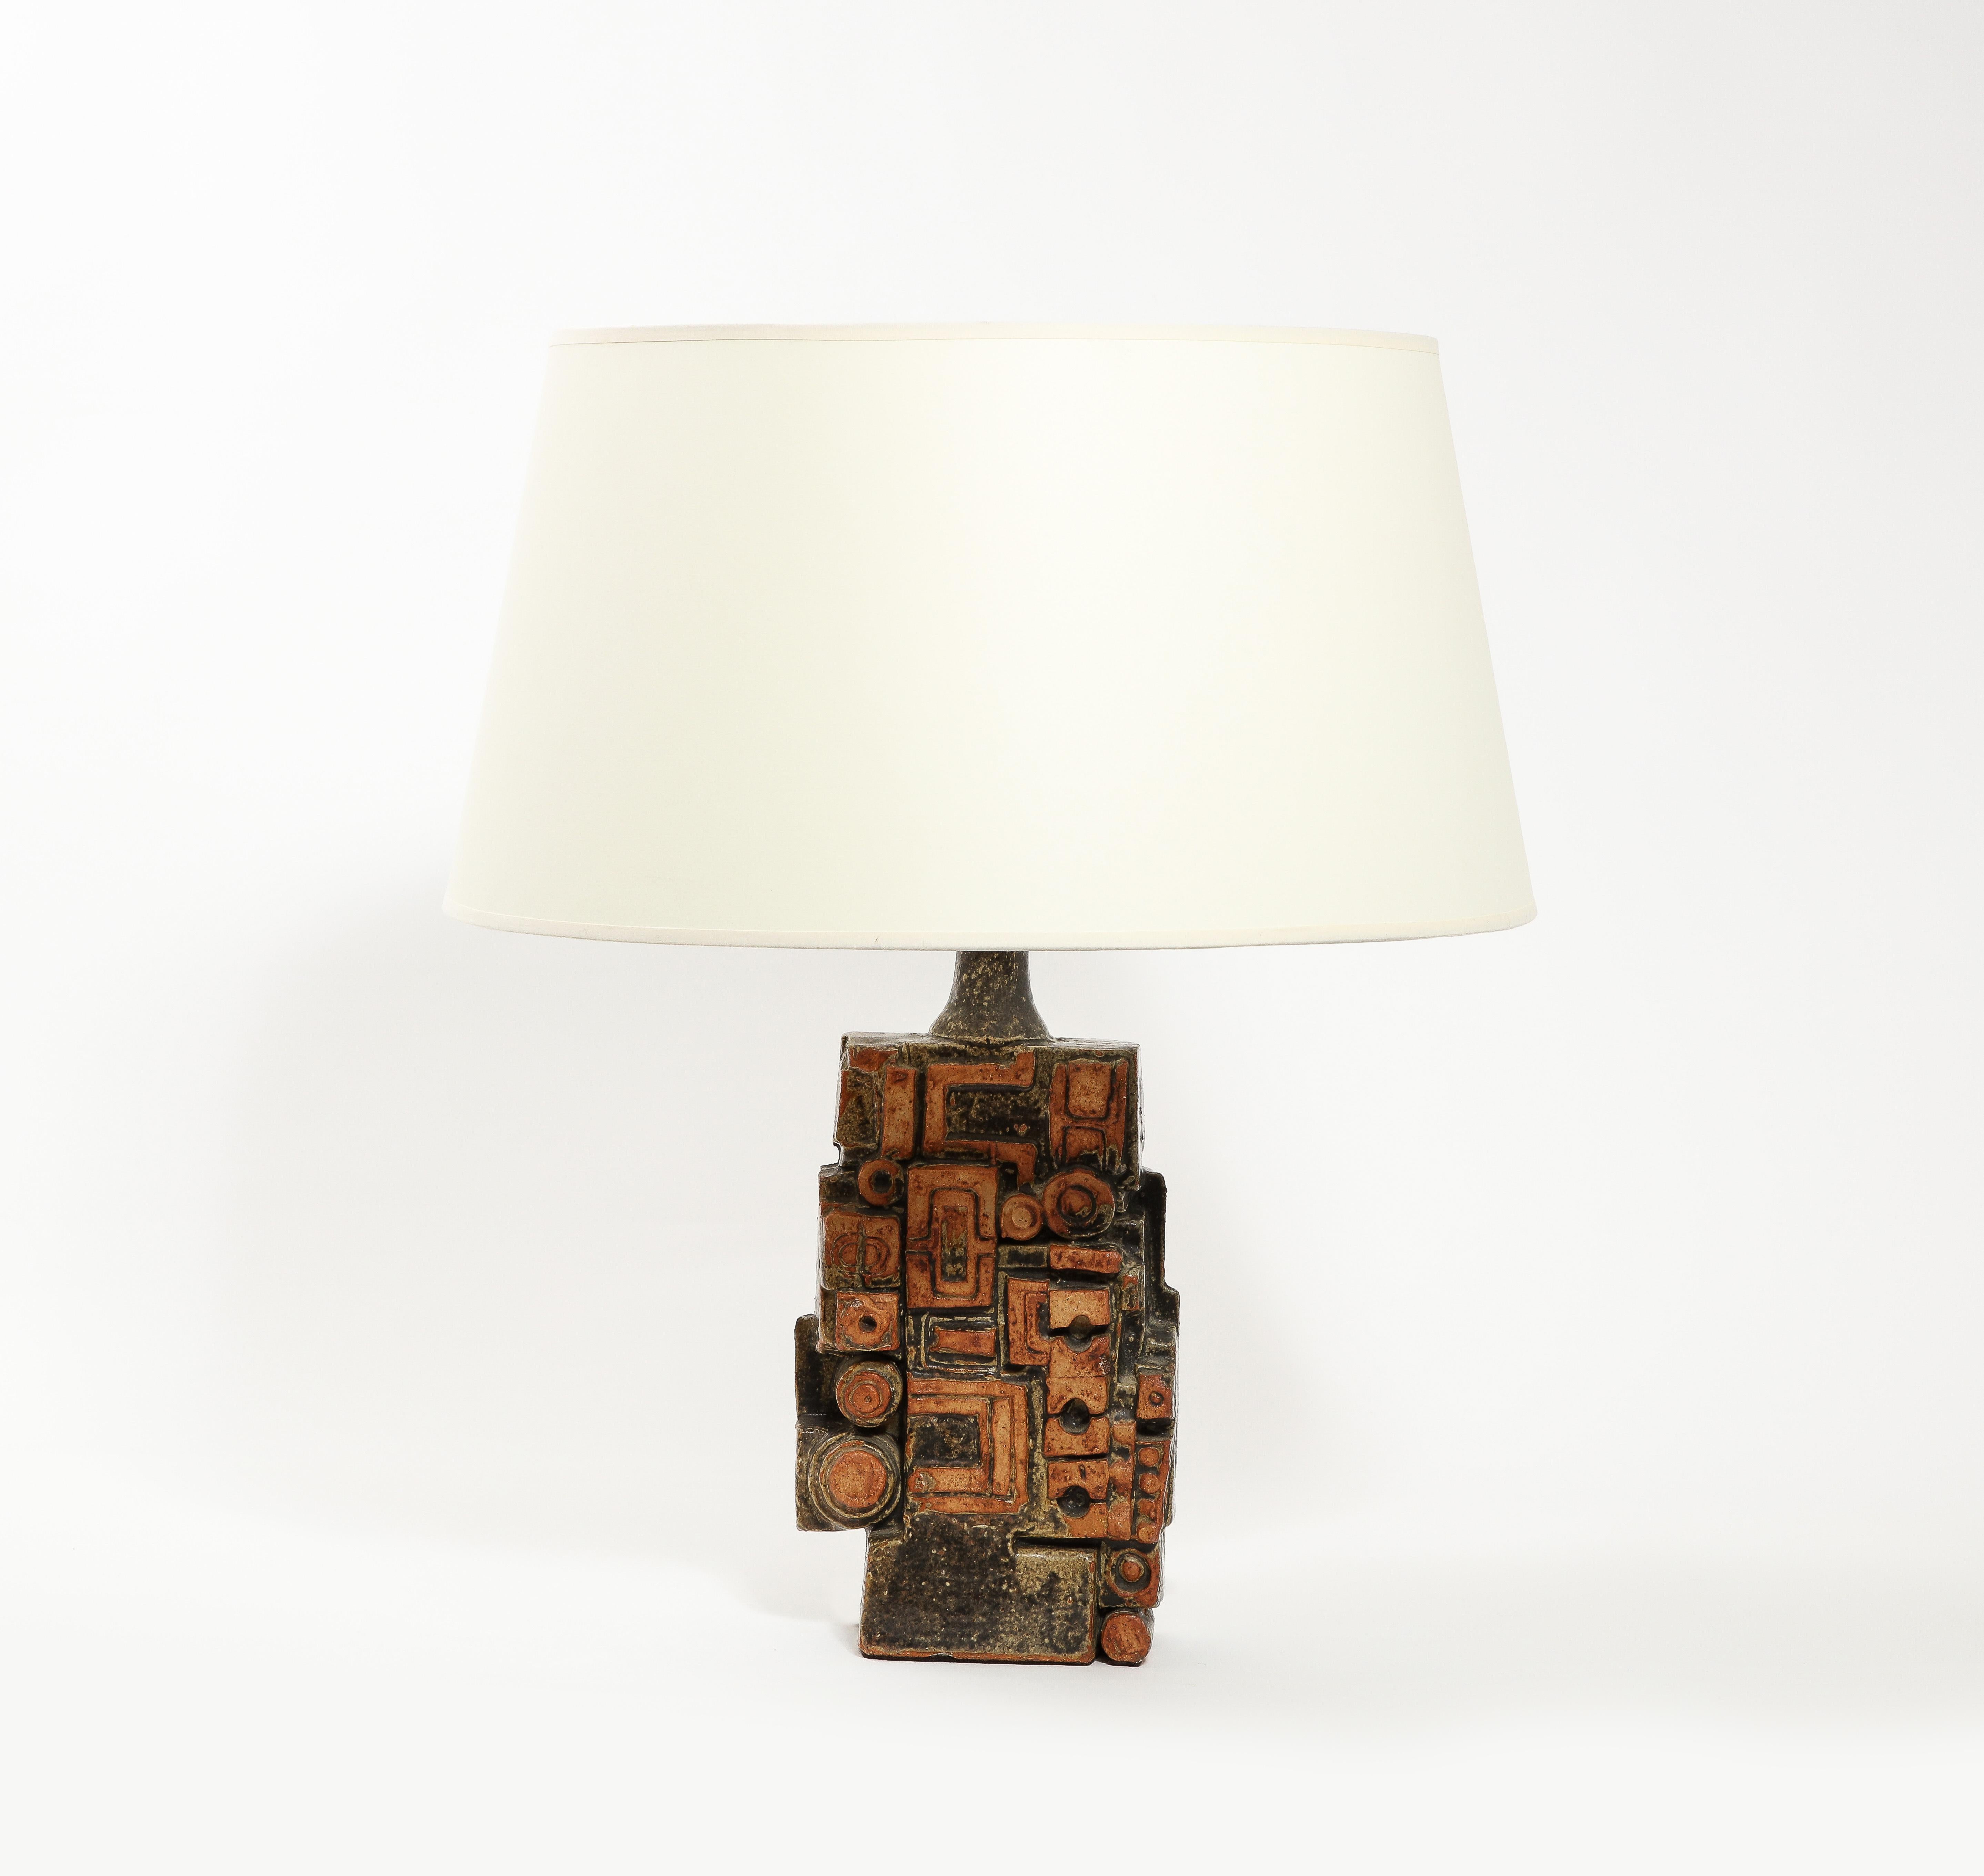 Brutalist table lamp by Bernard Rooke in a Mayan pattern with a textured finish and a nuanced green and ochre glaze. Size of the base only. No shade included.